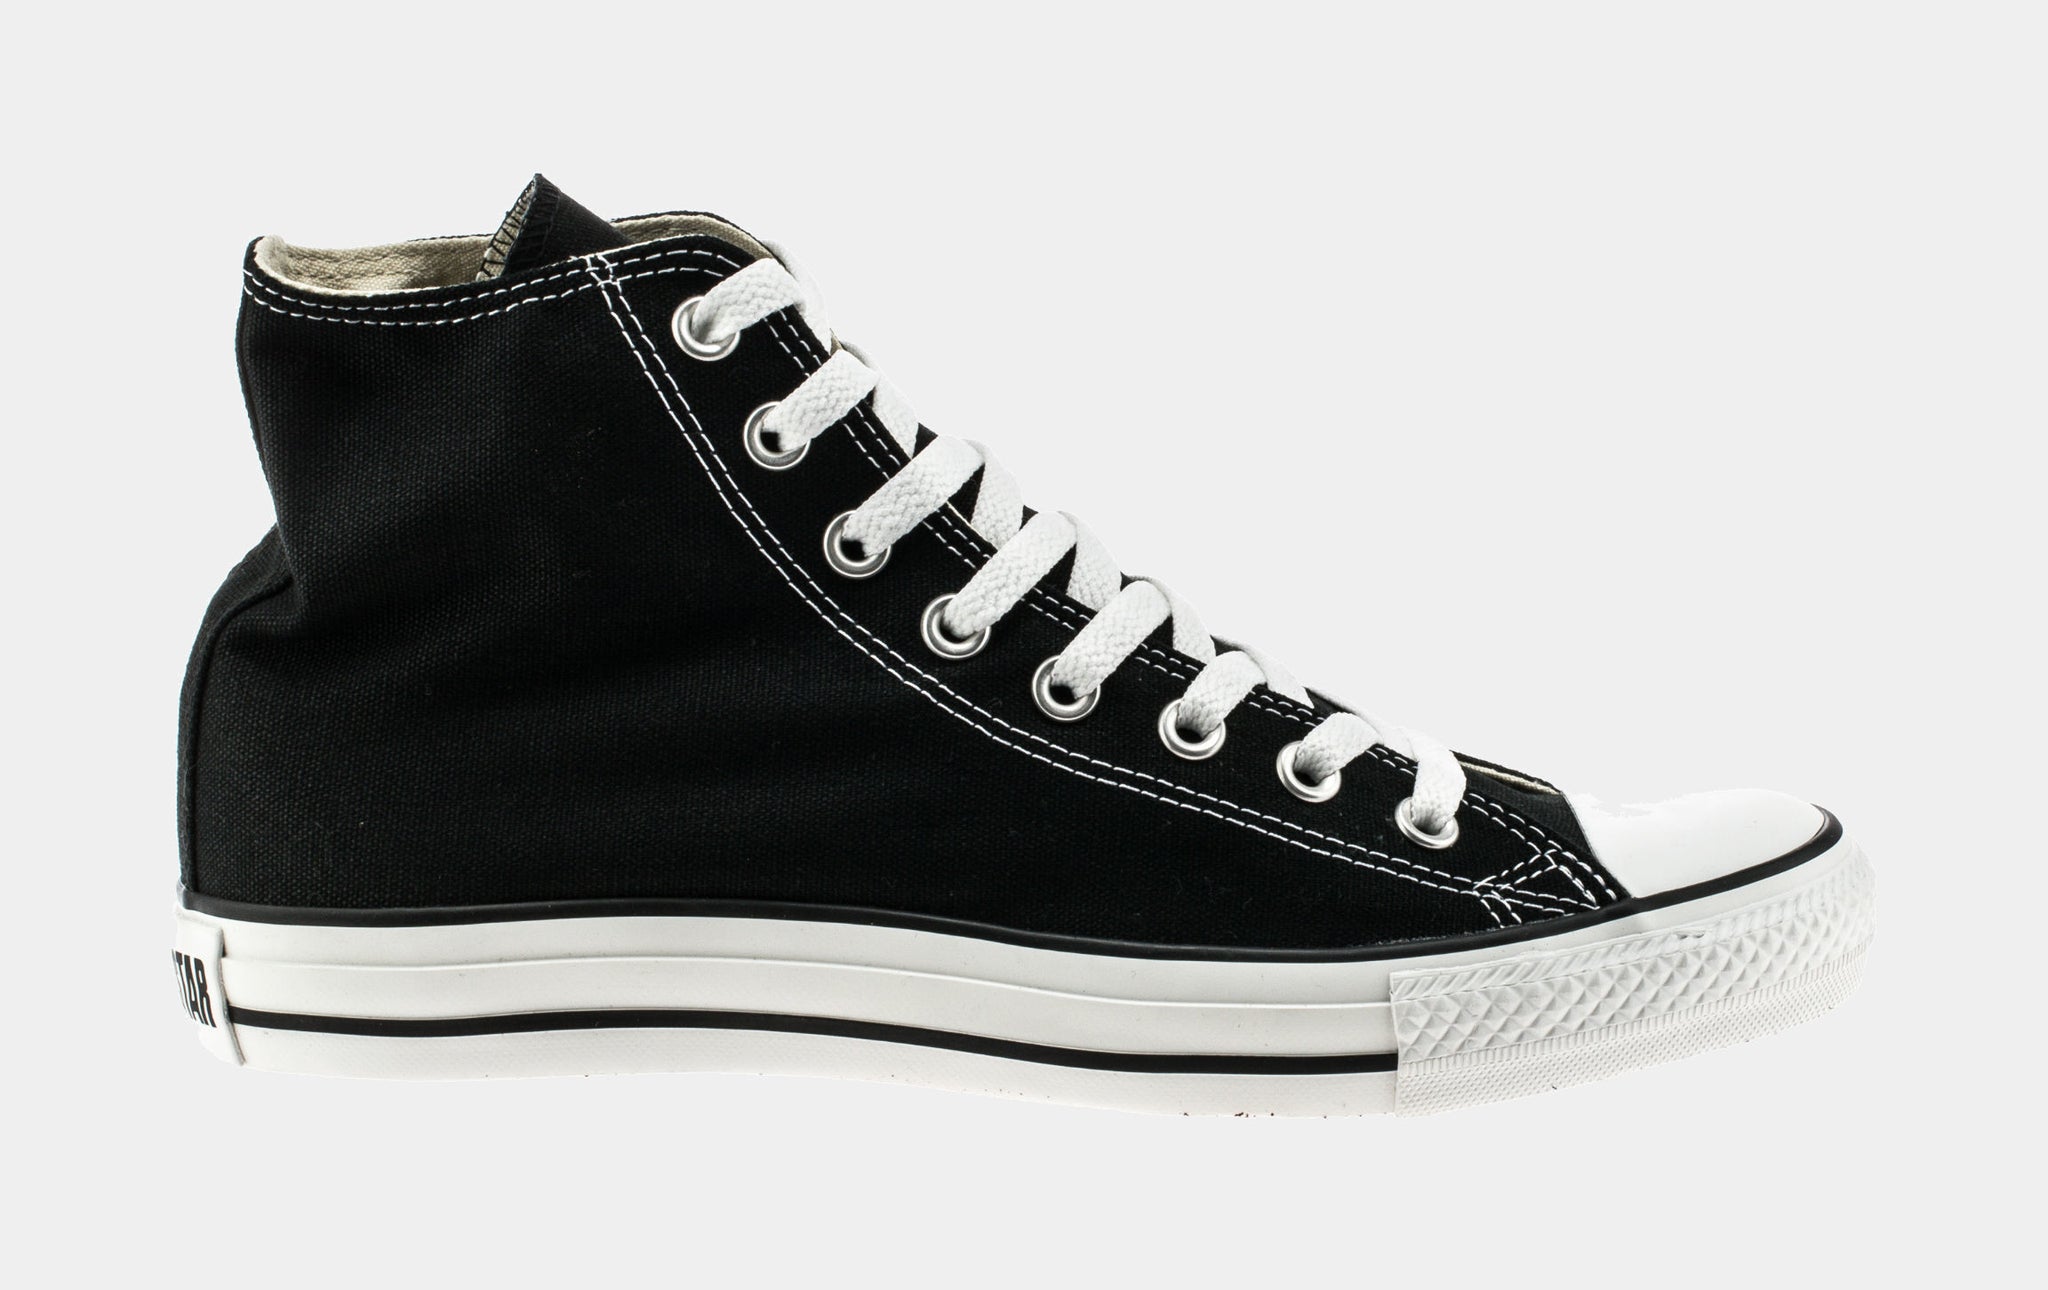 MultiscaleconsultingShops - Converse Chuck Taylor All-Star Hi